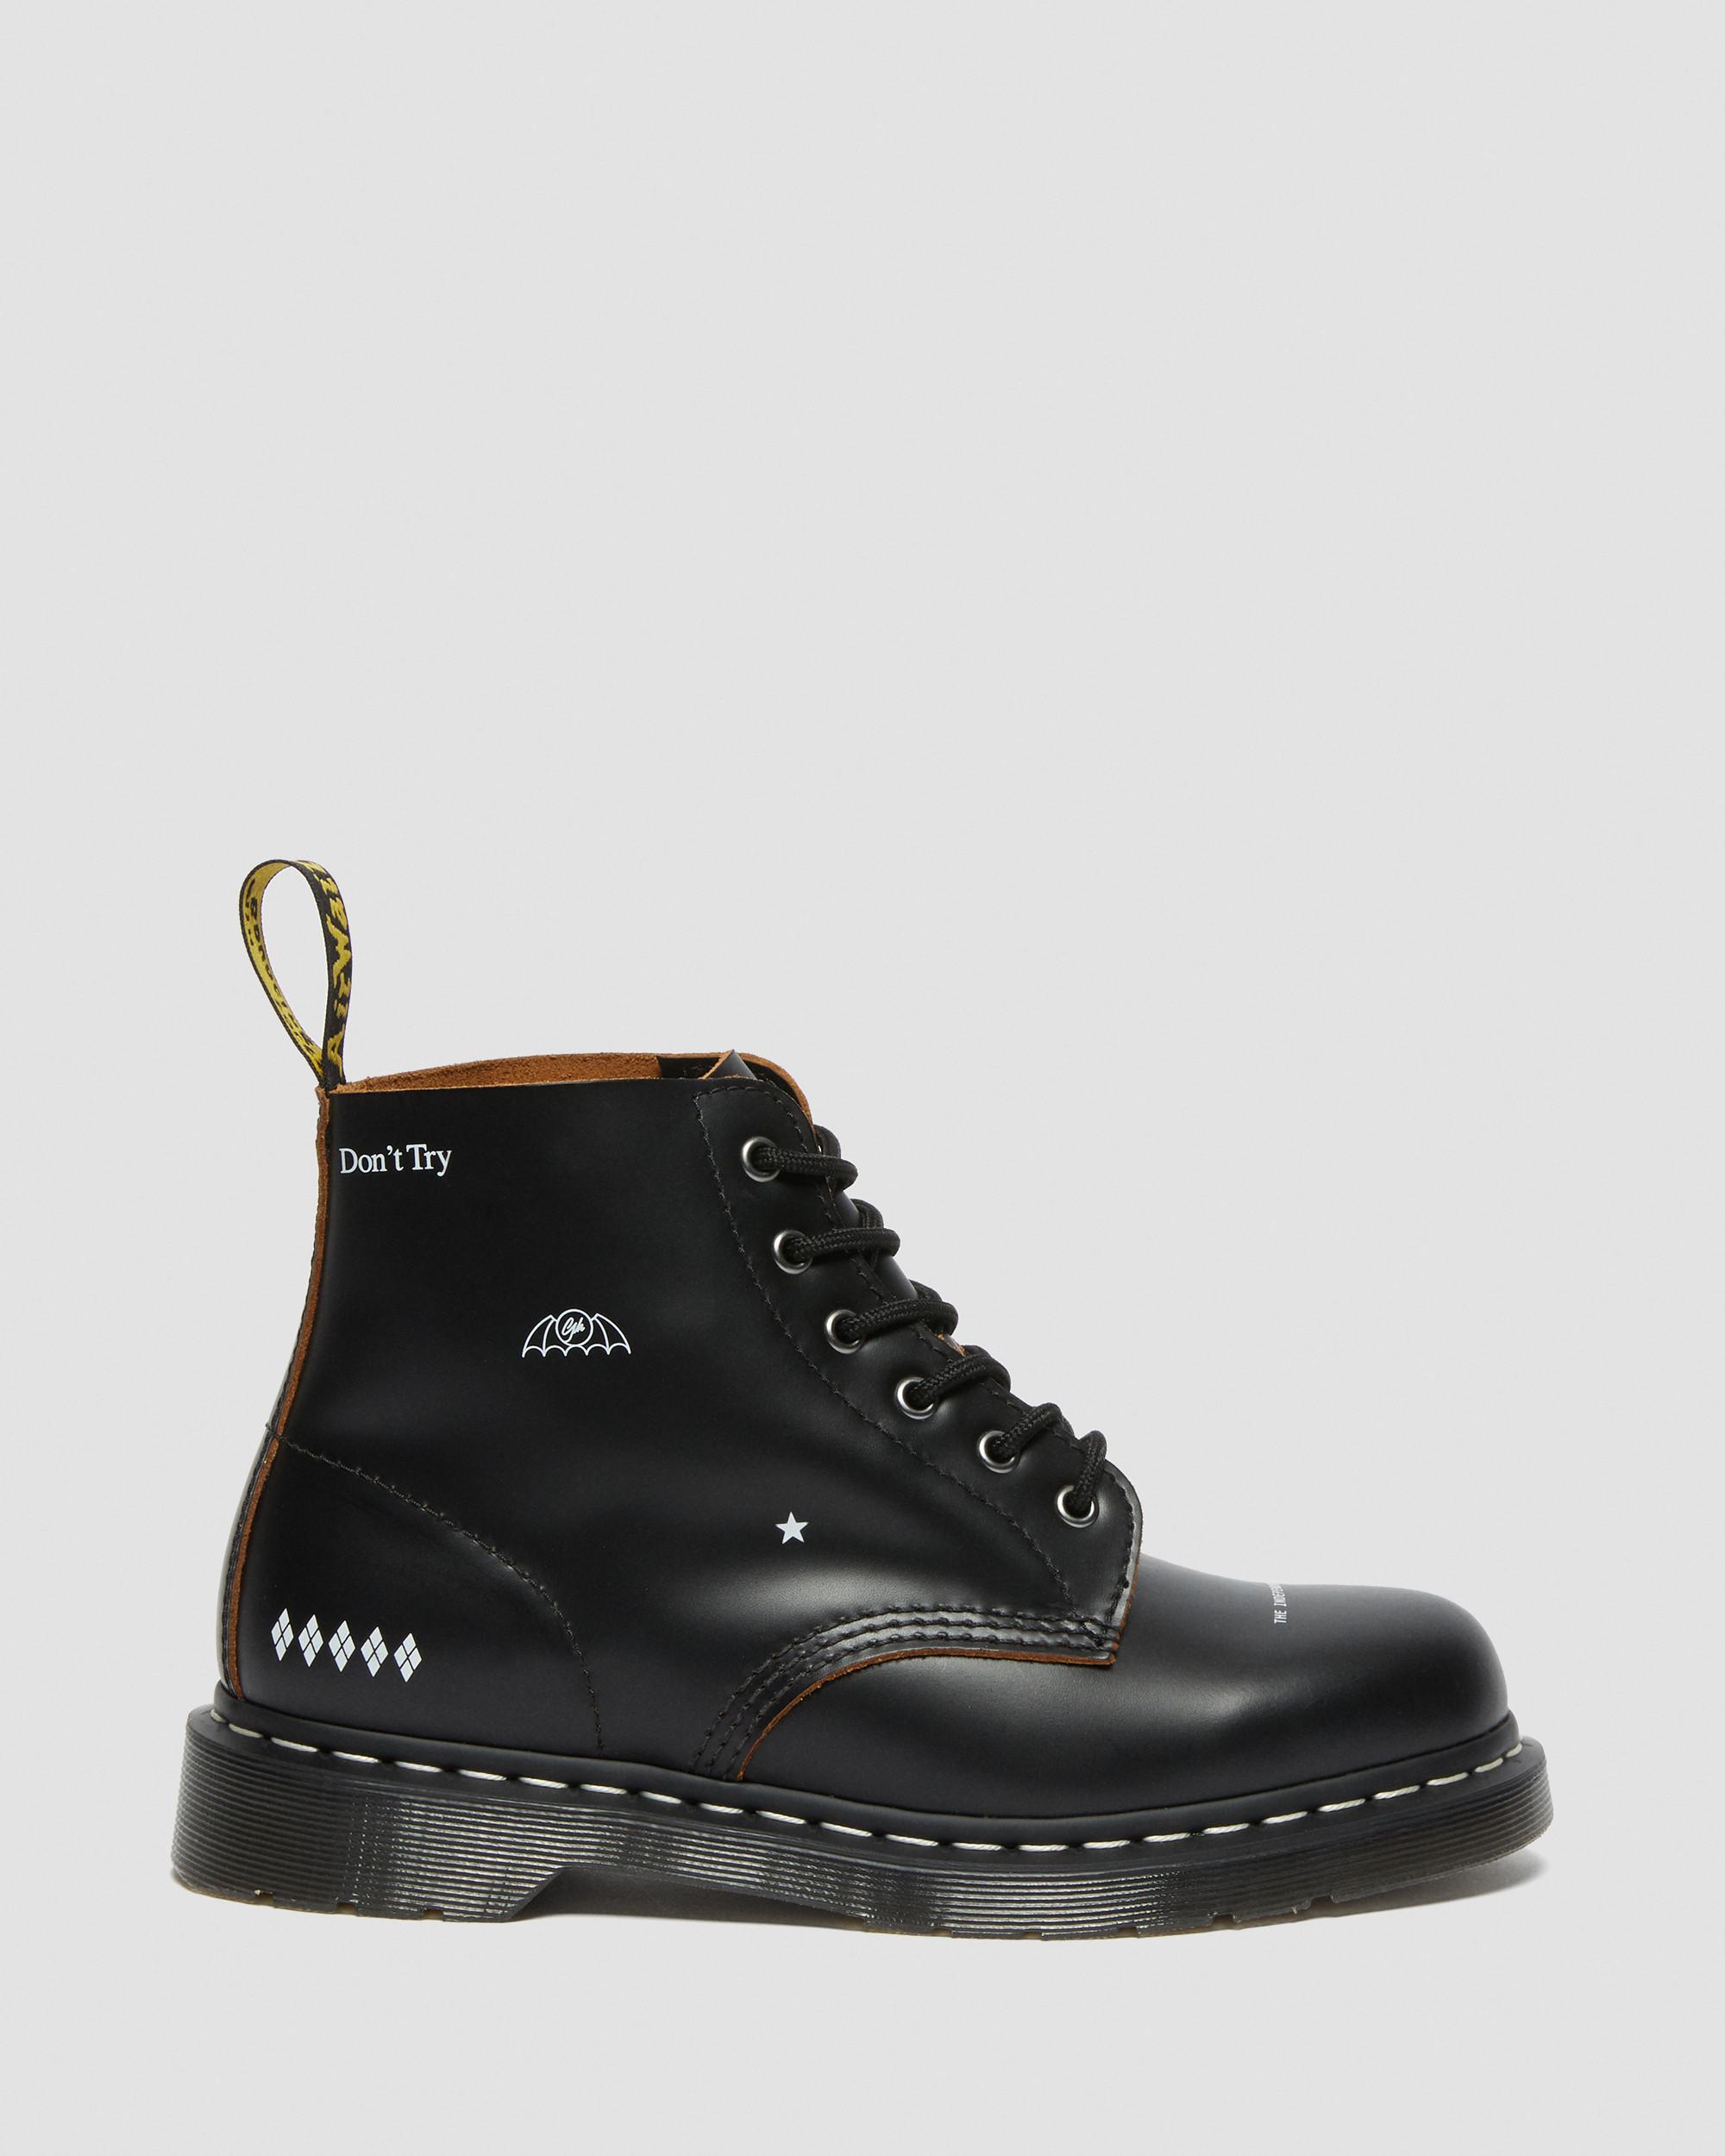 101 Goodhood Smooth Leather Ankle Boots, Black | Dr. Martens